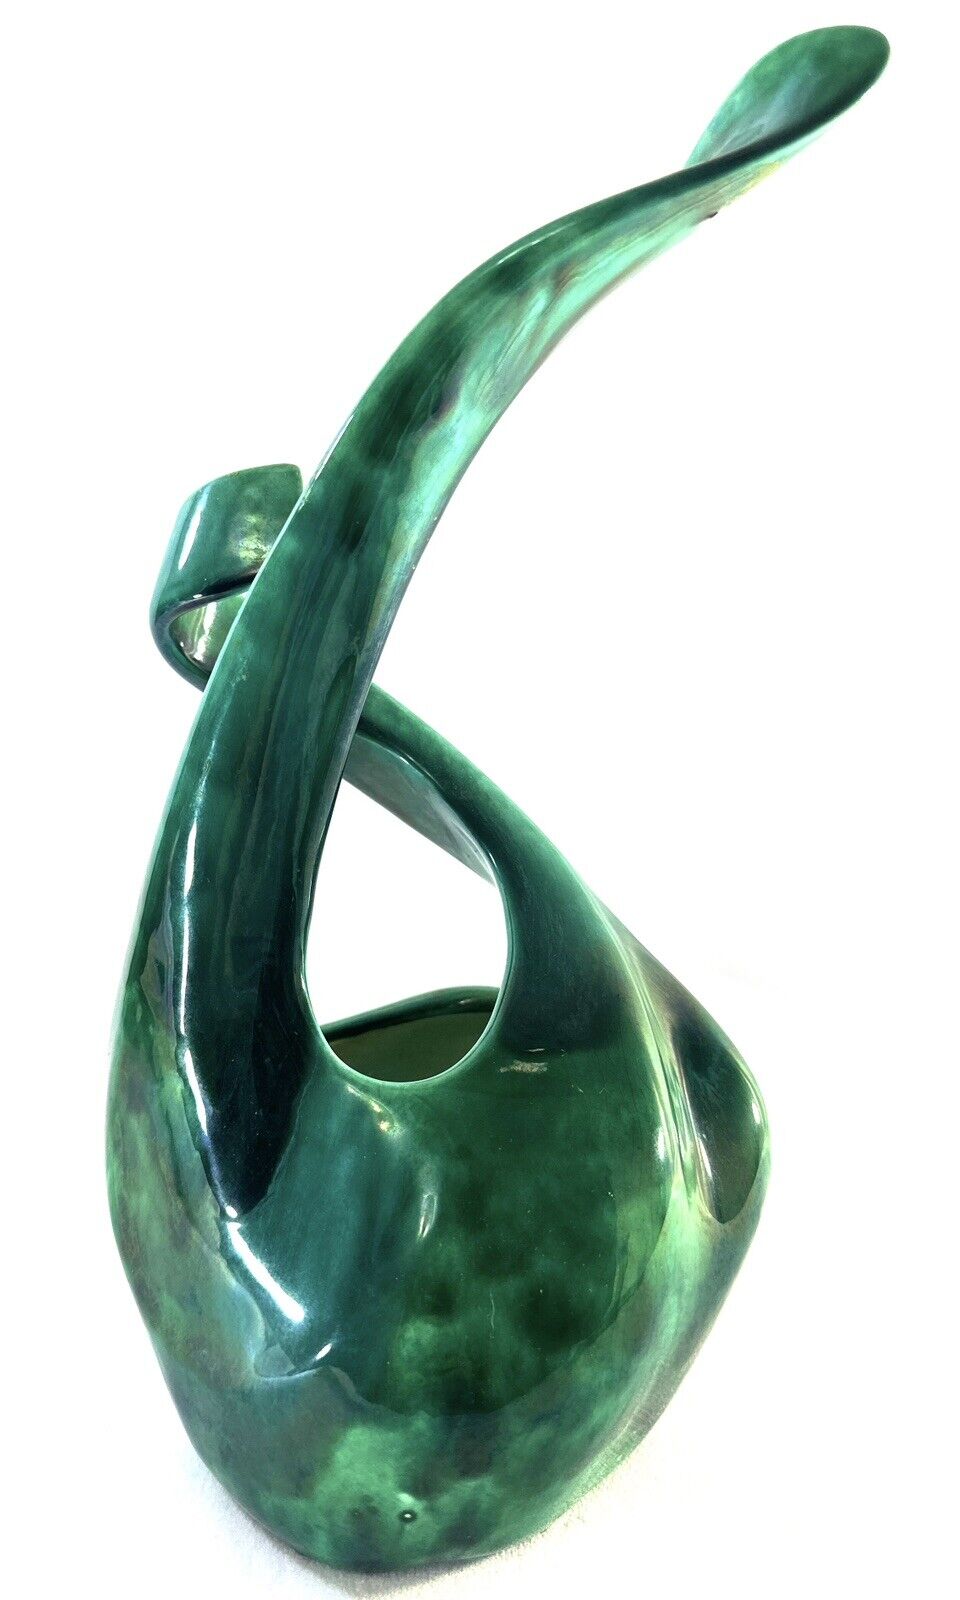 Vintage 60s Unique Pottery Planter Vase Green Painted Ceramic Swirl 12” Tall